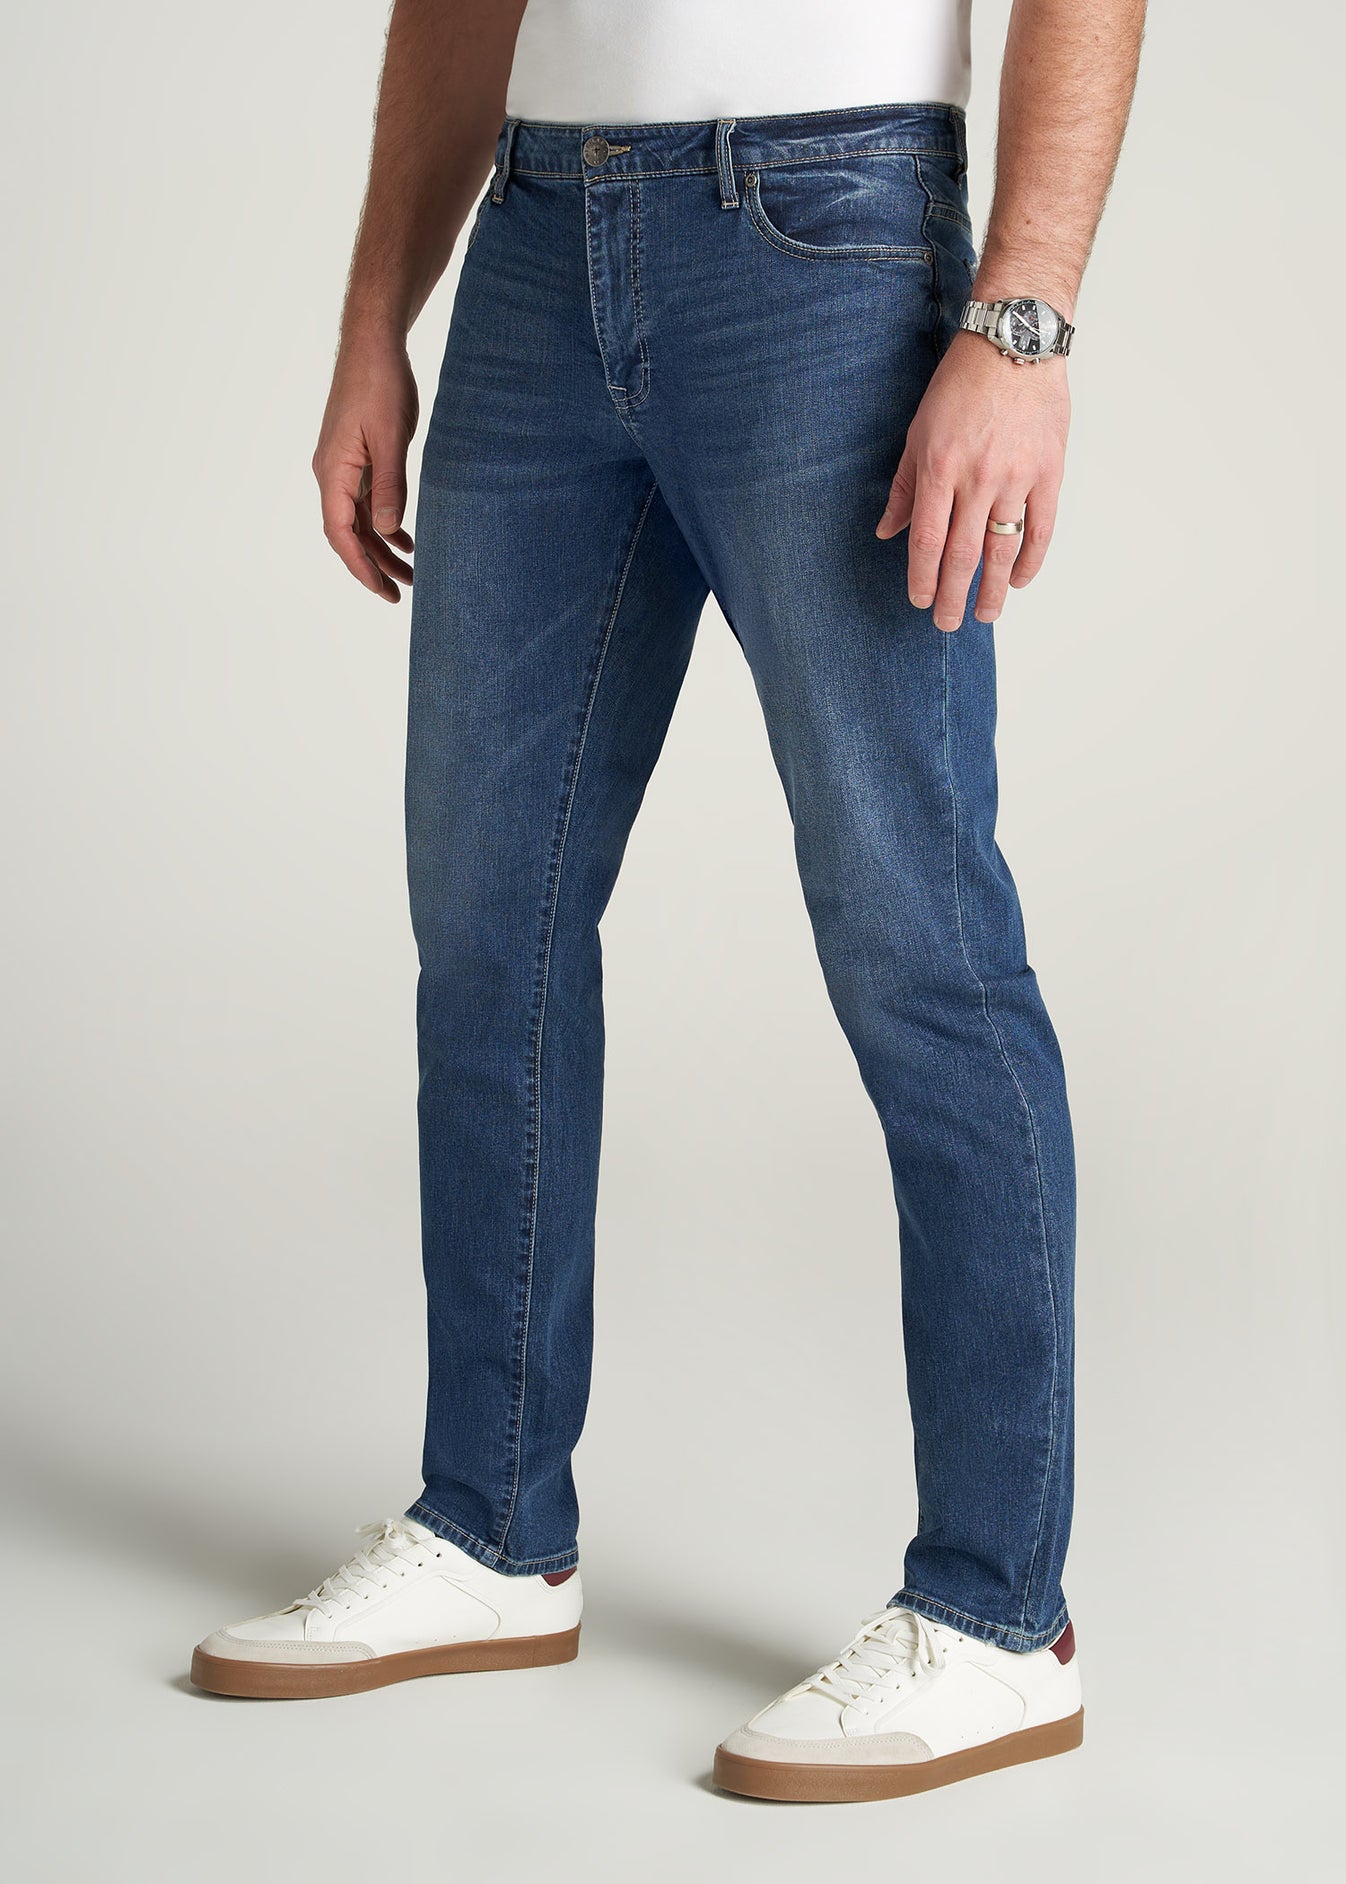 Carman Tapered Jeans For Tall Men Signature Fade | American Tall